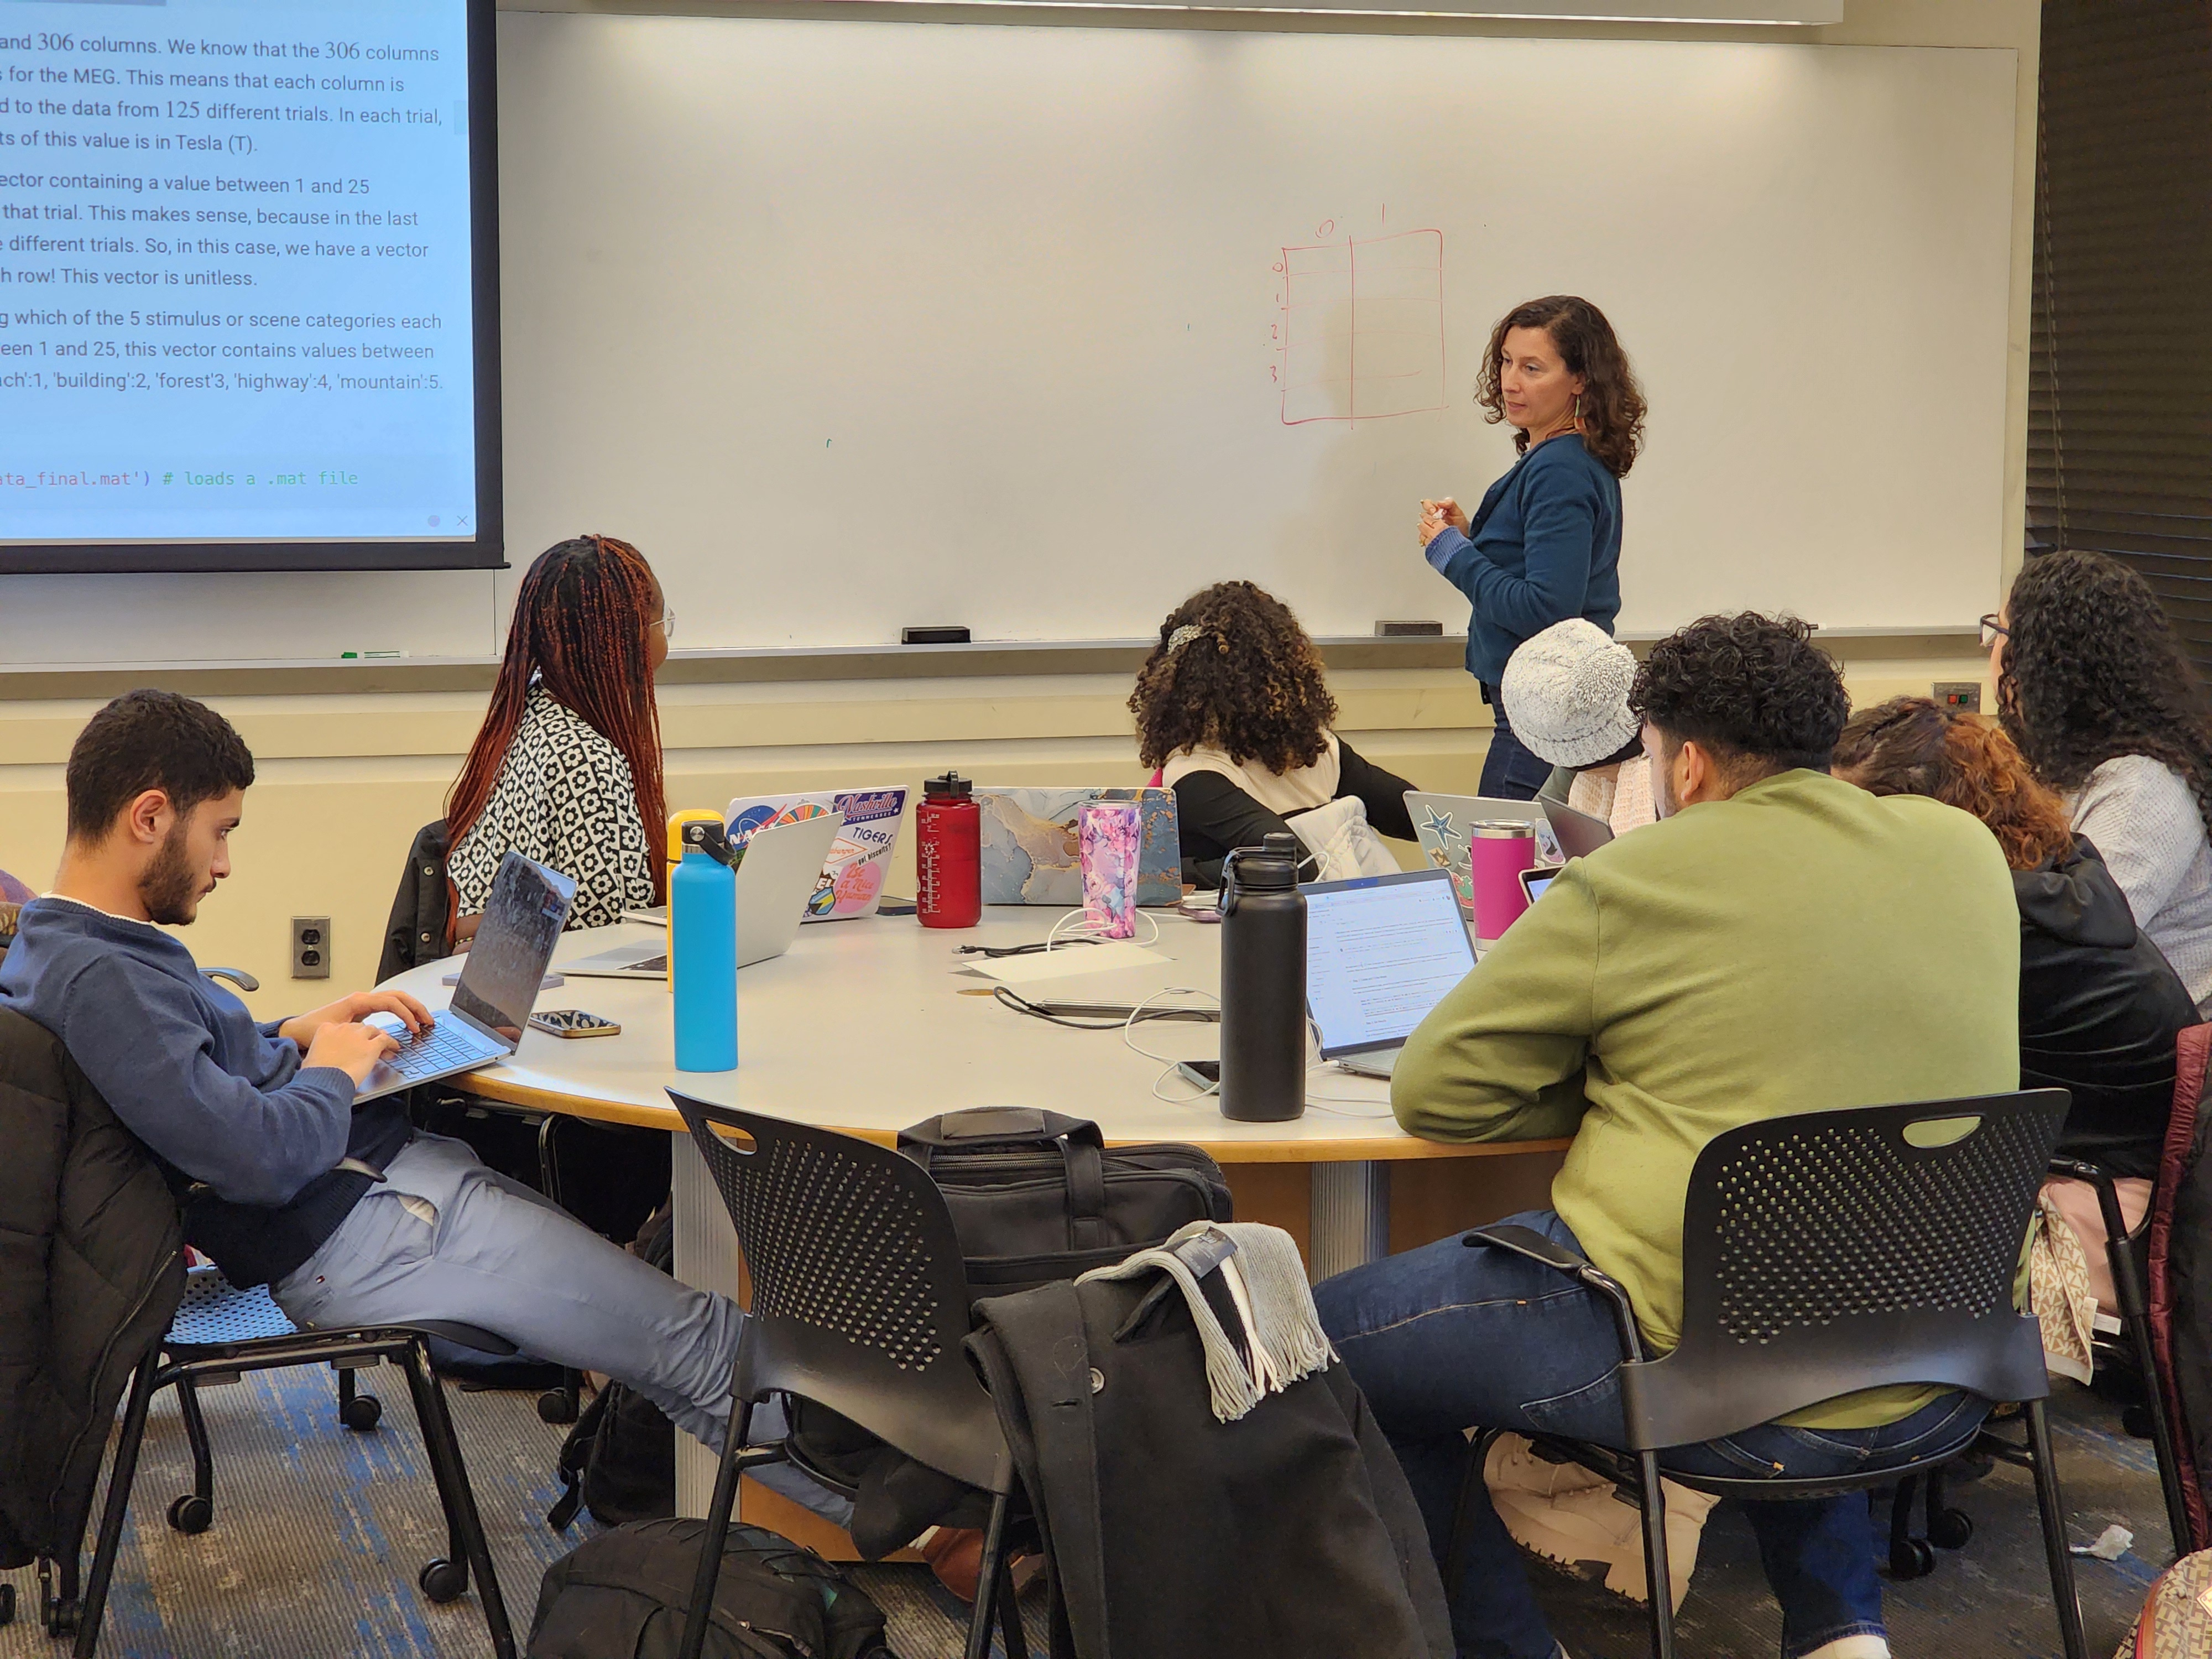 Tiziana Ligorio stands at a whiteboard next to a projector screen and looks back at a table of QMW students as she explains a programming concept.